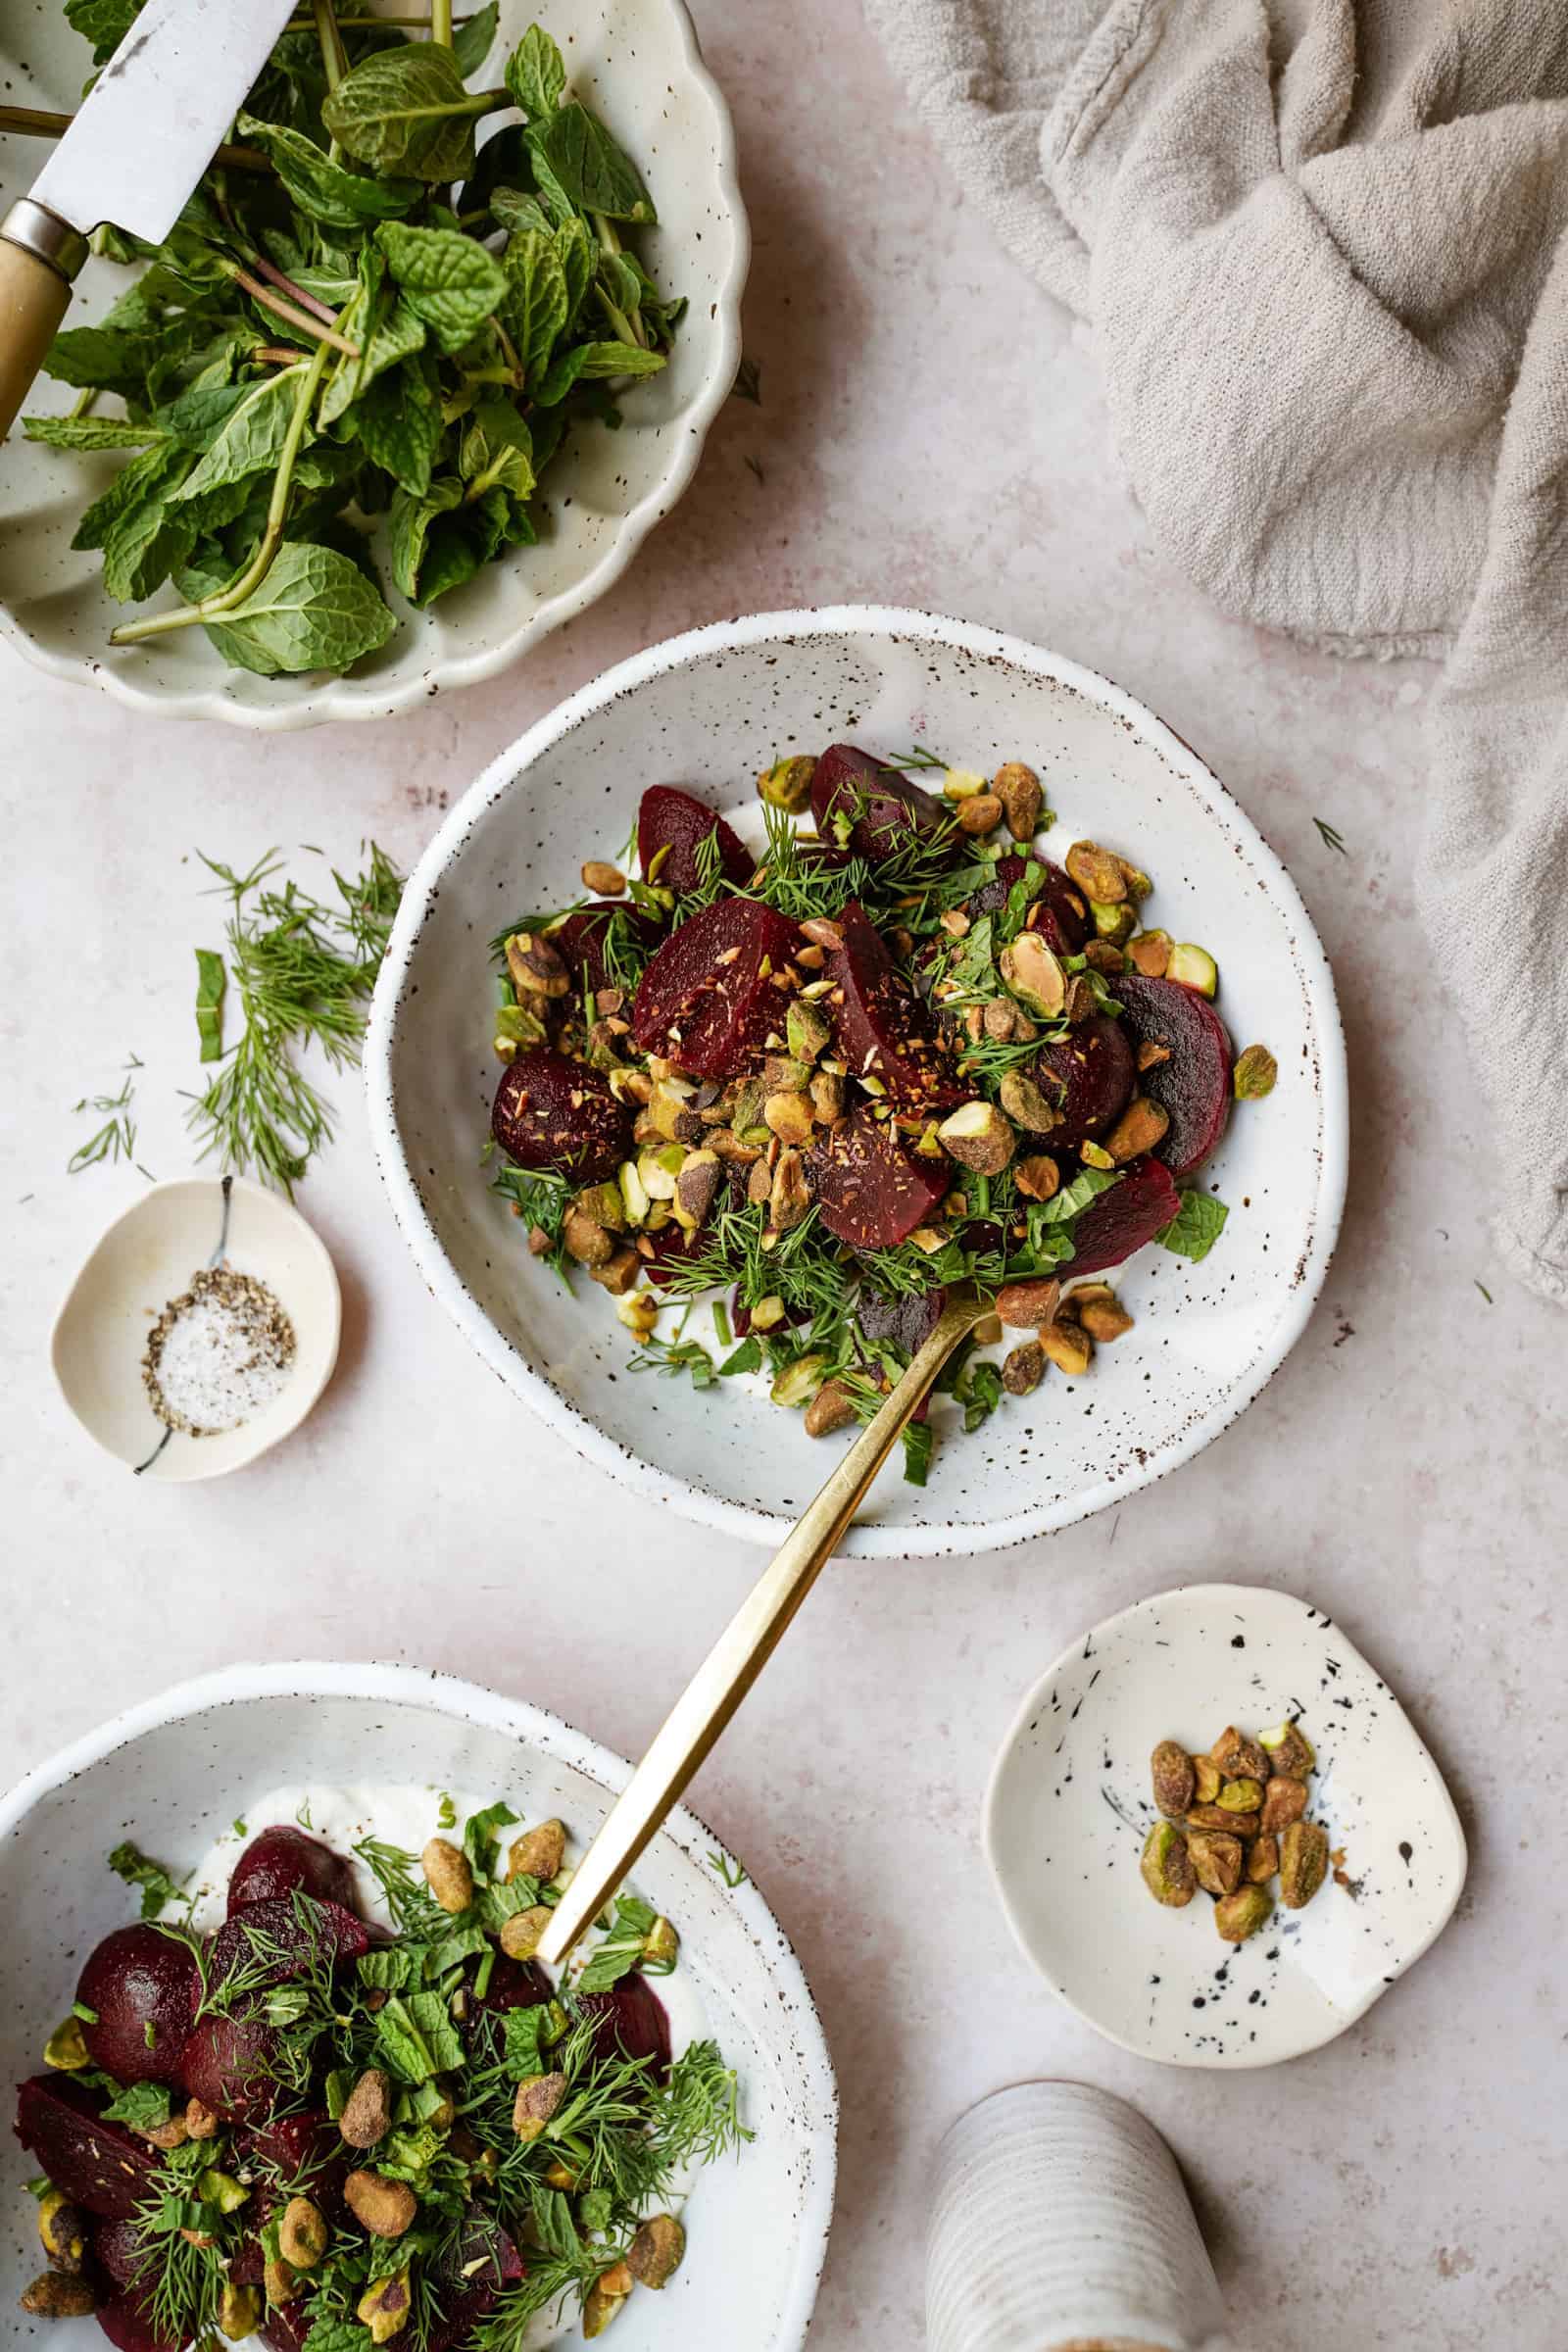 Roasted beet salad with feta surrounded by ingredients on table